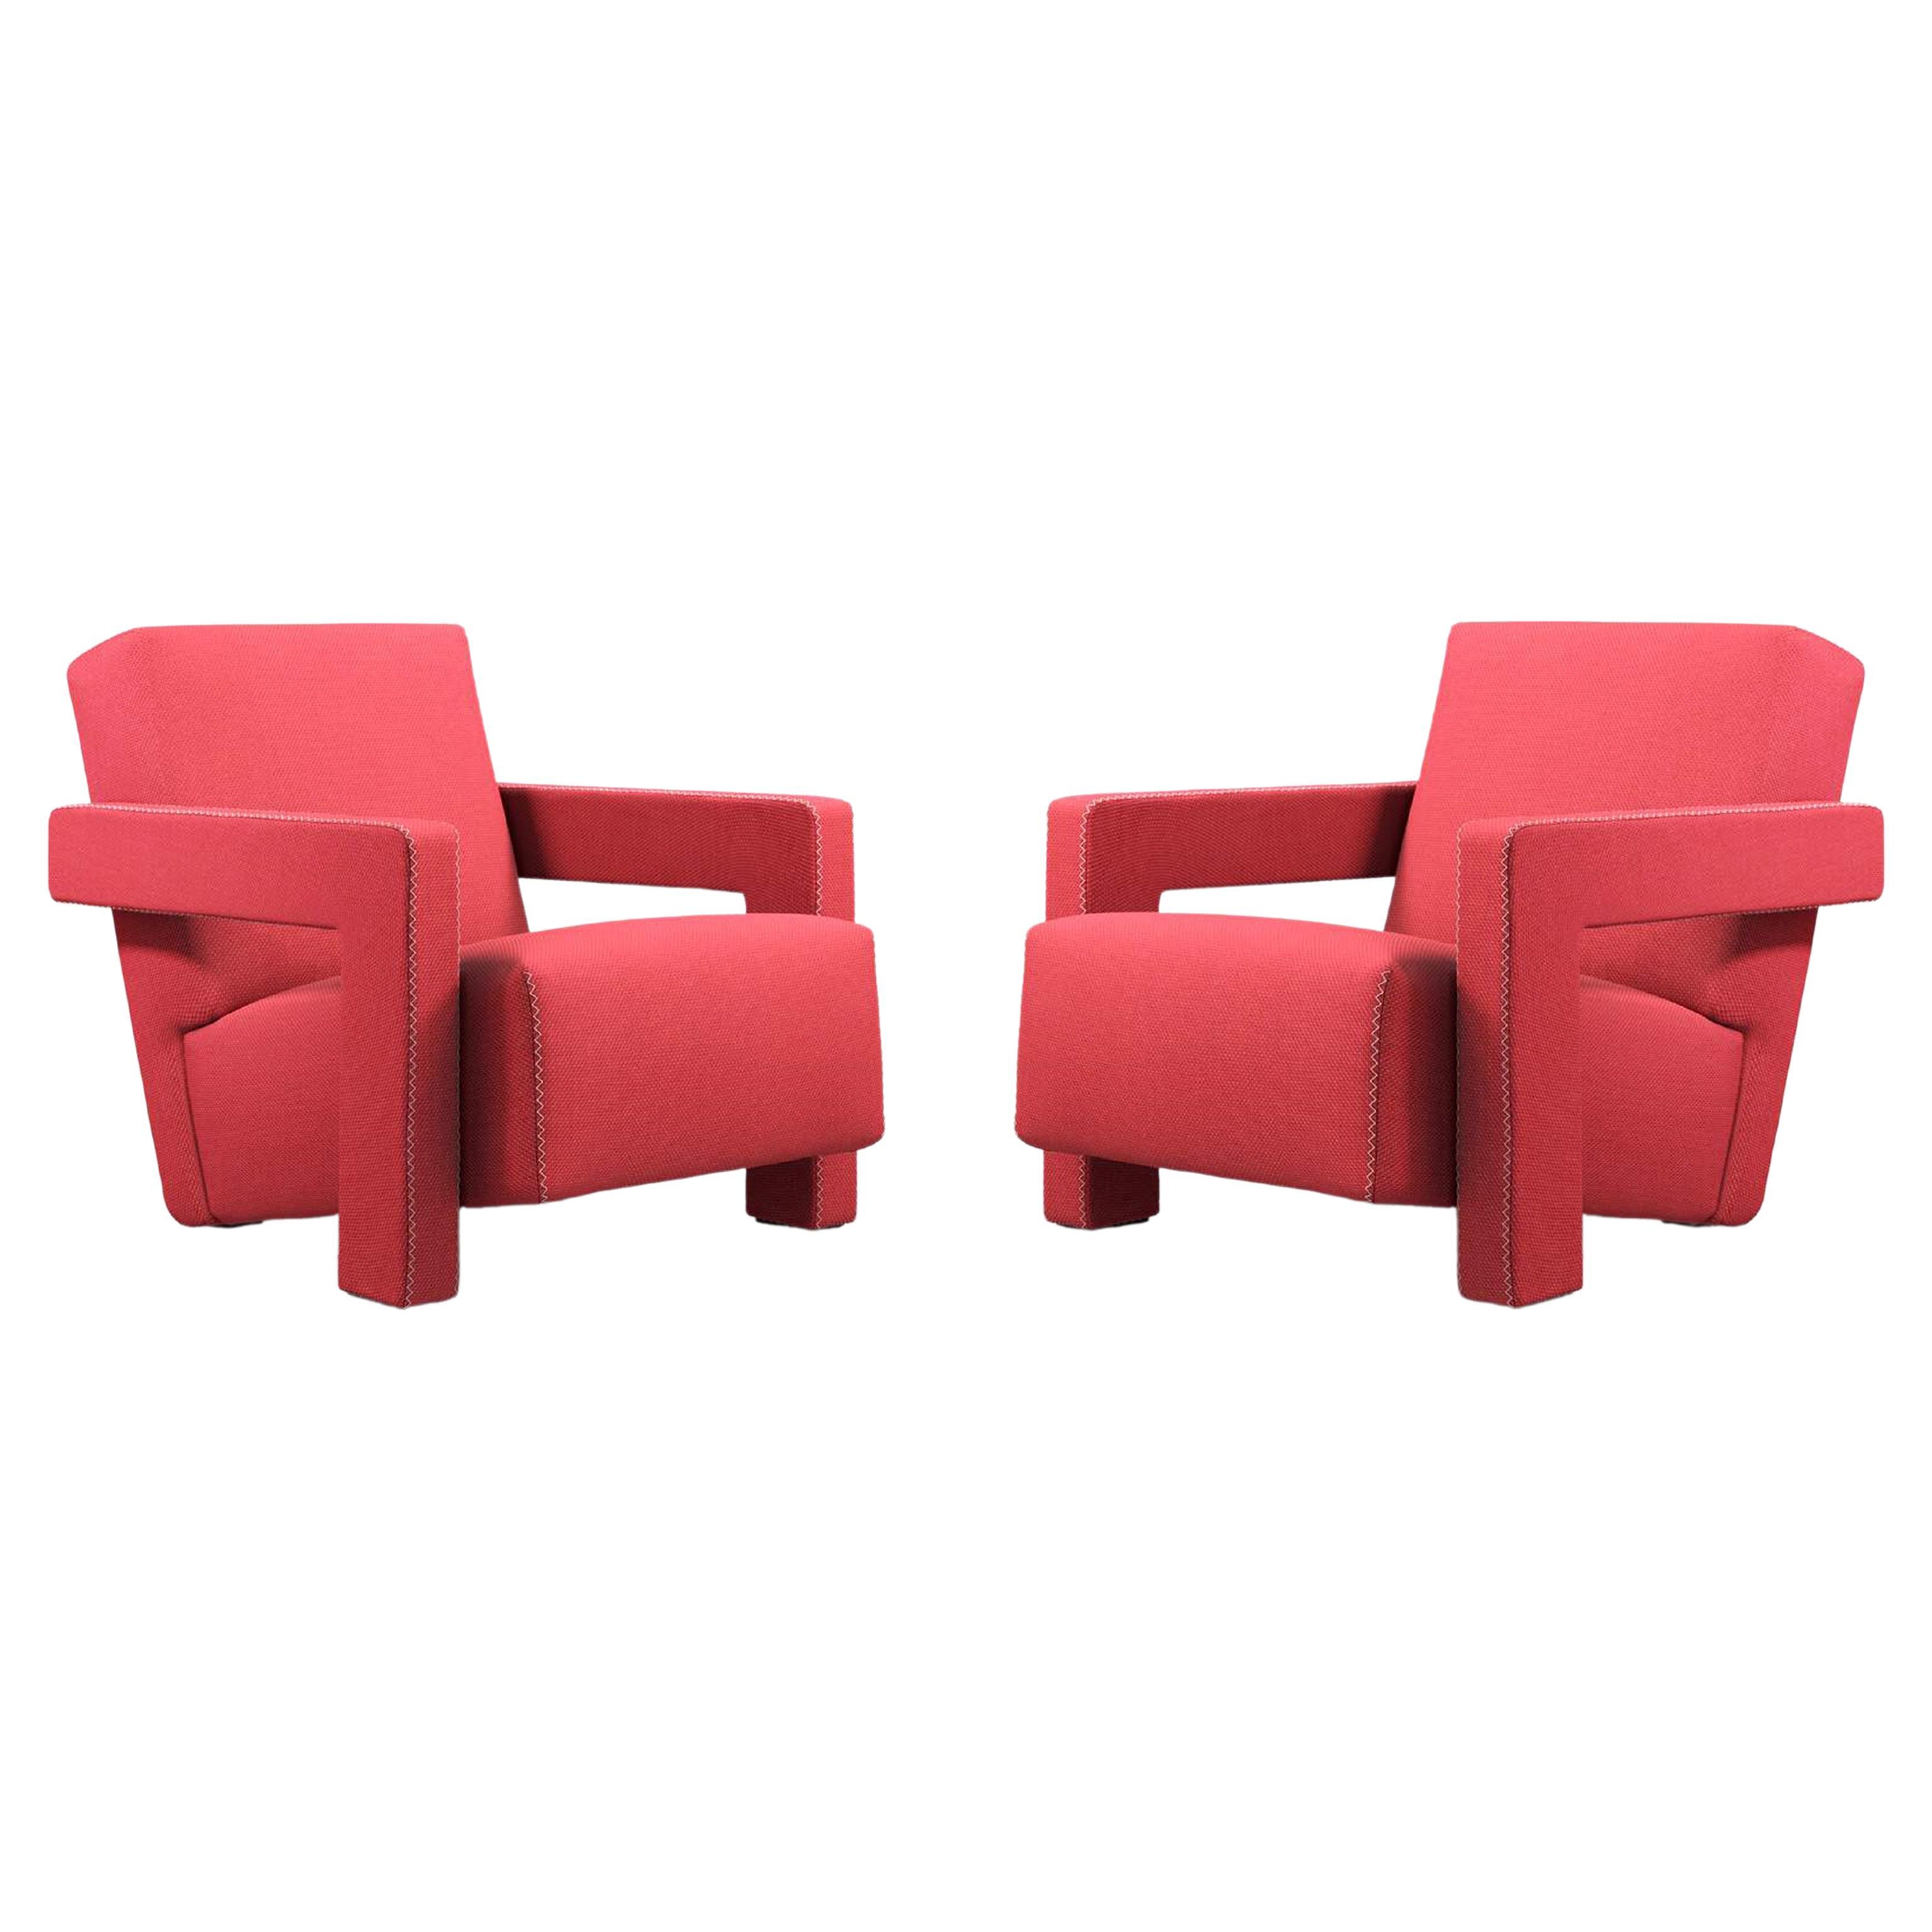 Set of Two Utrech Armchair by Gerrit Thomas Rietveld for Cassina For Sale